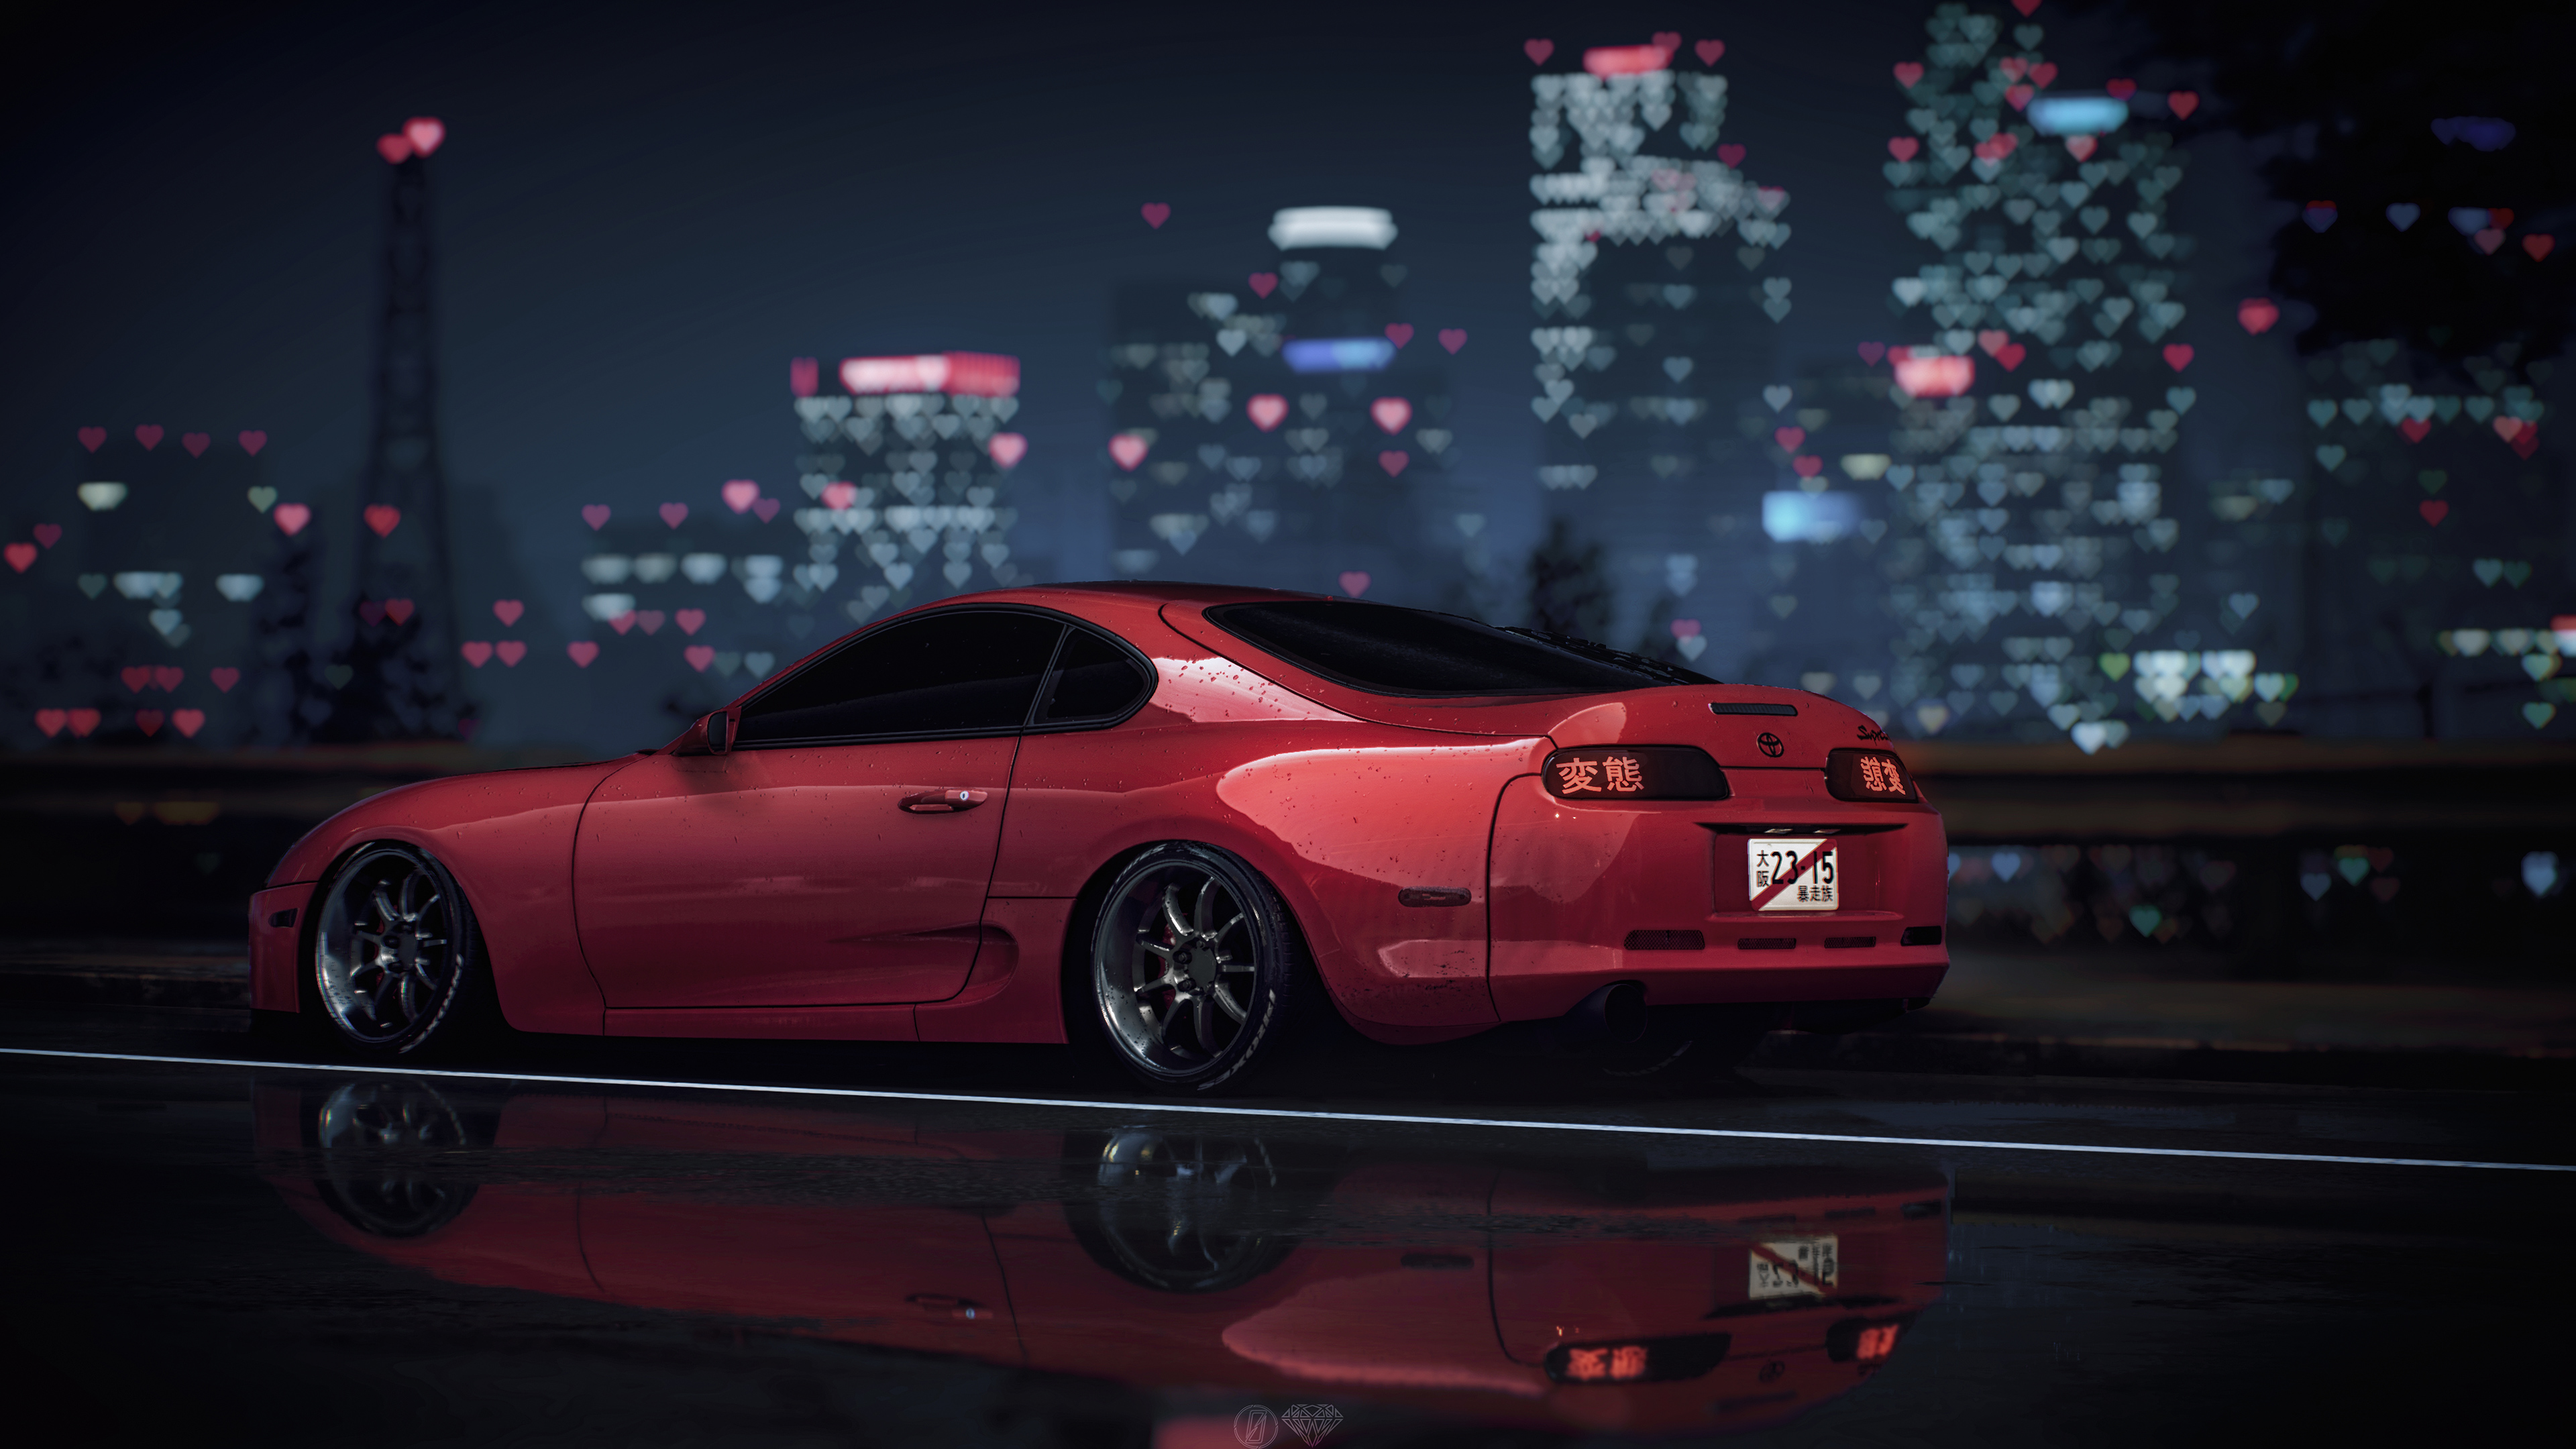 Free download 5837176 toyota supra need for speed games HD 4k cars Cool [3840x2160] for your Desktop, Mobile & Tablet. Explore Red Supra Wallpaper. Supra Wallpaper, Supra Shoes Wallpaper, Supra Footwear Wallpaper